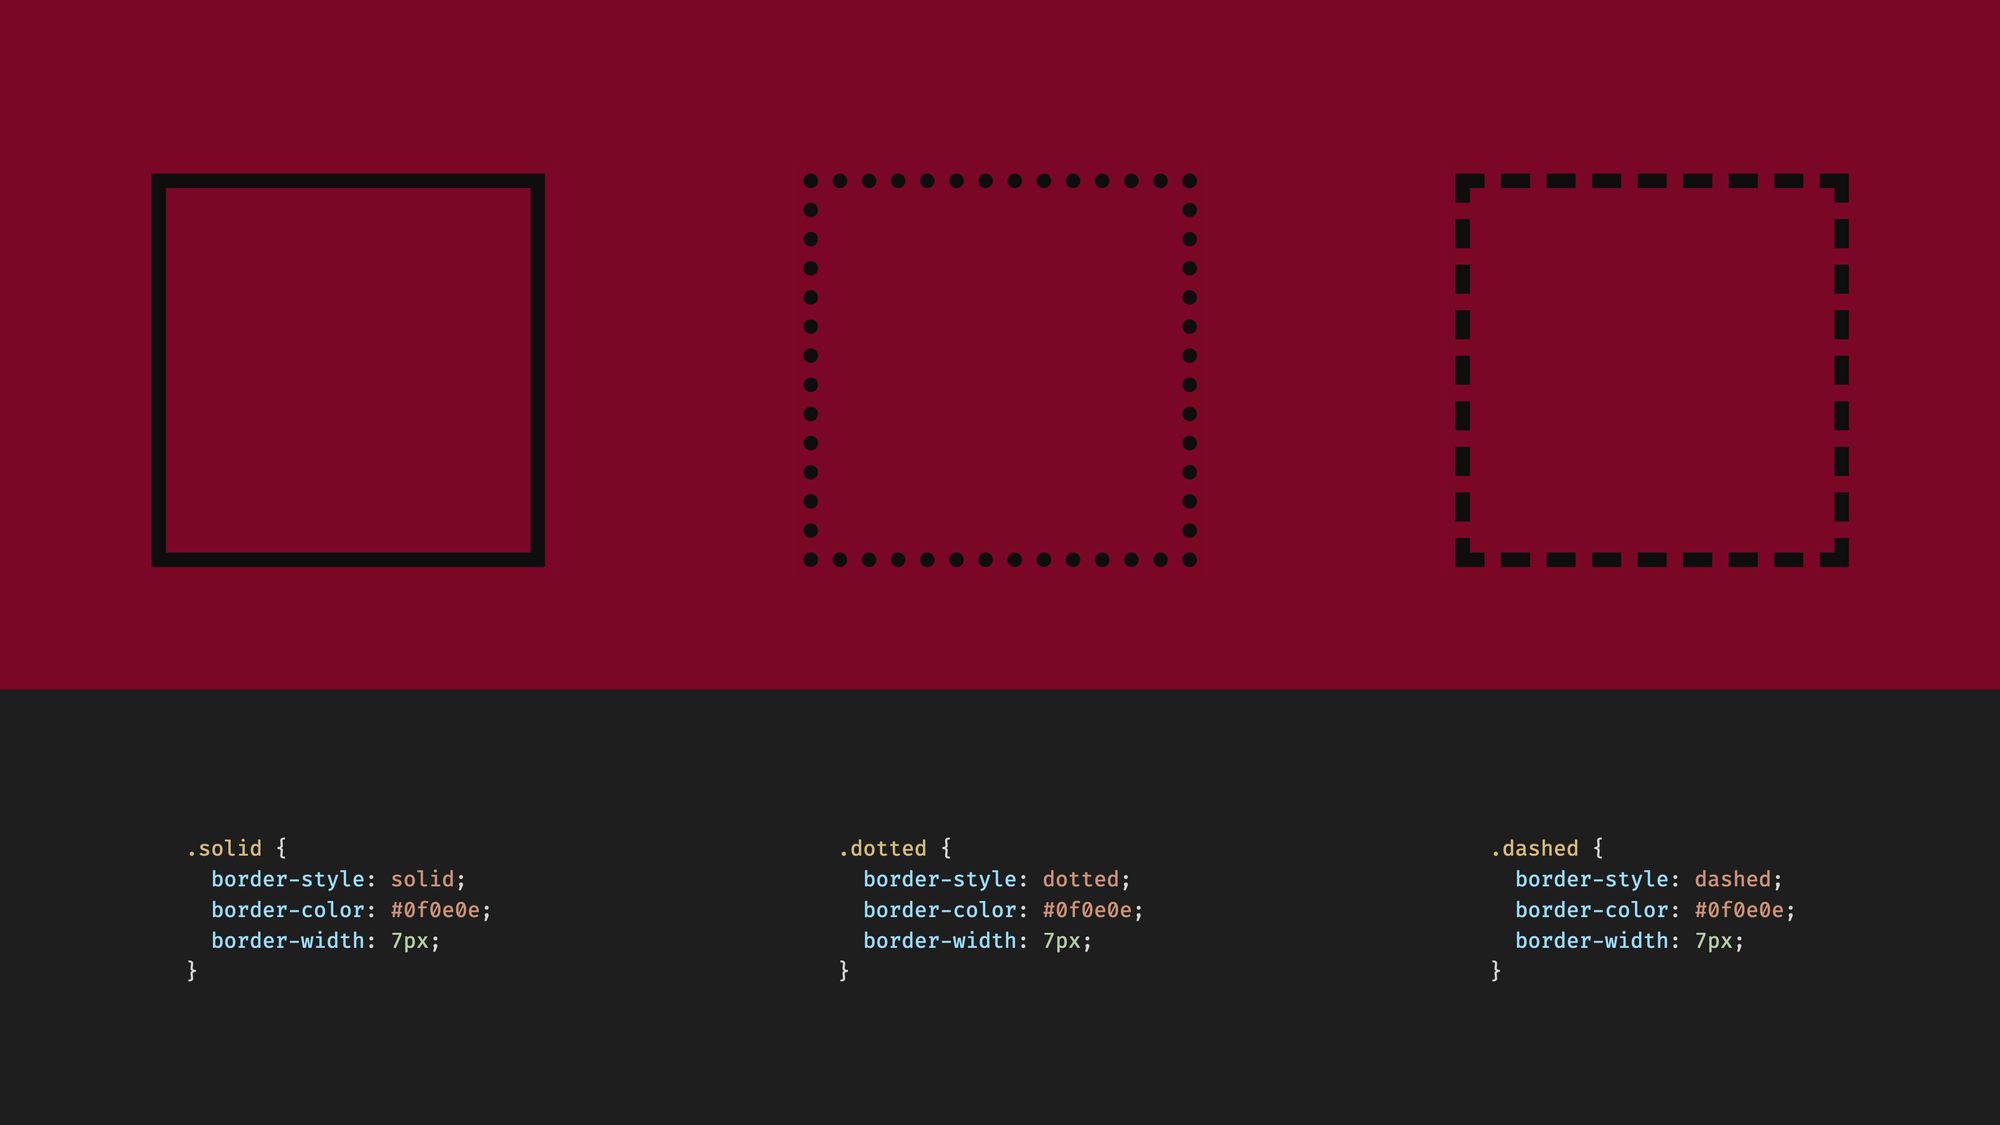 SVG + JavaScript Tutorial – How to Code an Animated Watch